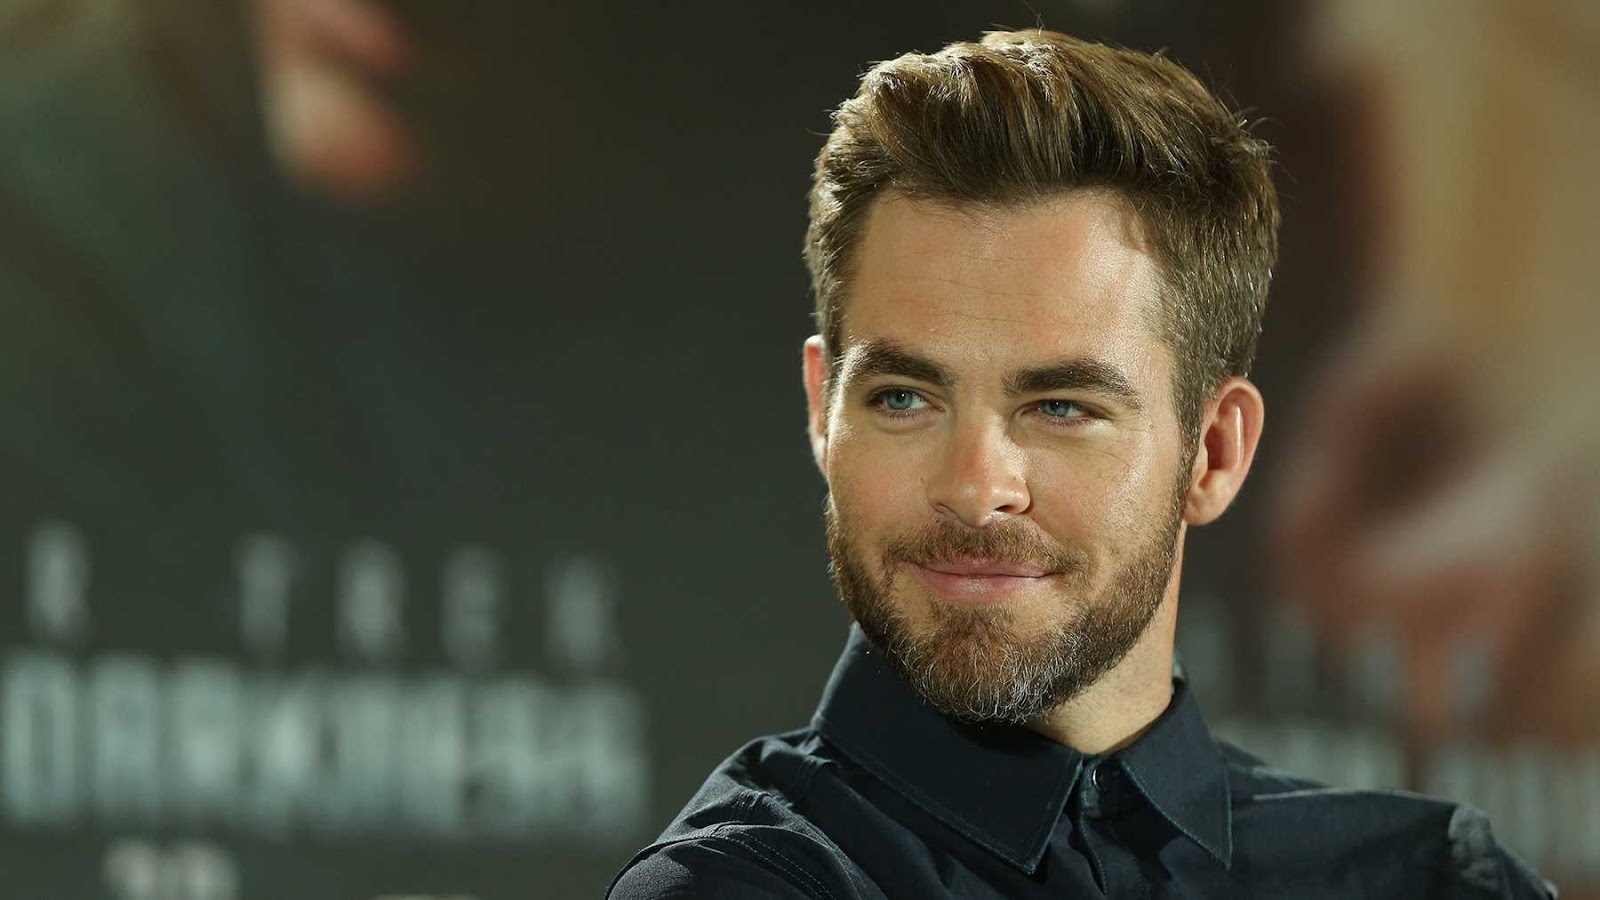 The Saint Reboot Chris Pine Set To Star in Relaunch of the Classic